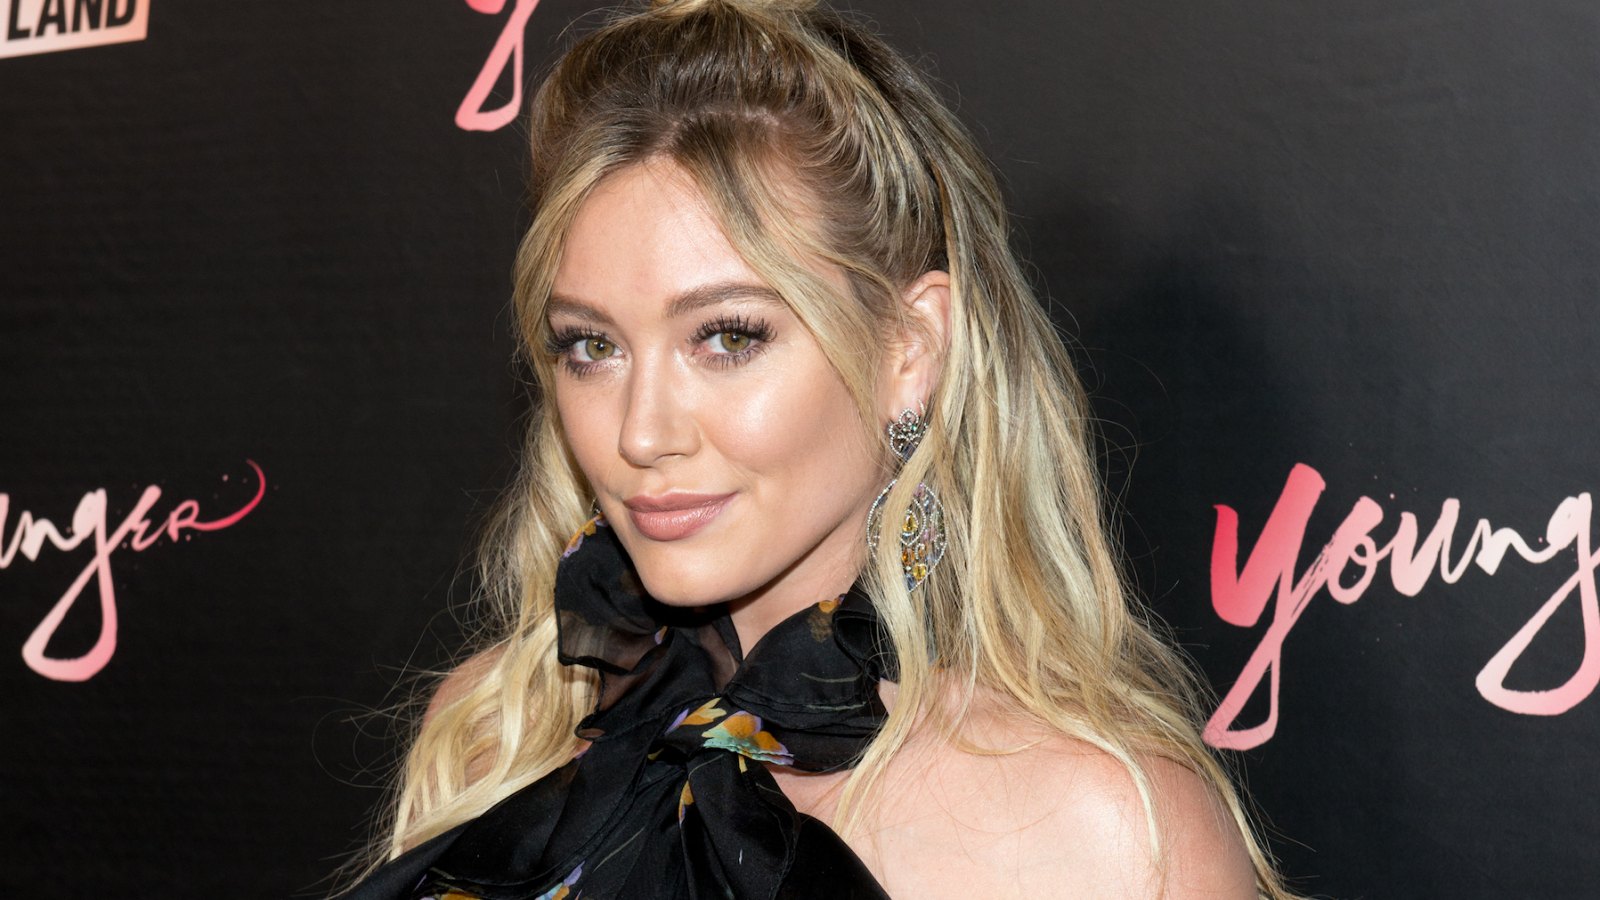 Hilary Duff’s Home Burglarized After She Shares Vacation Pics